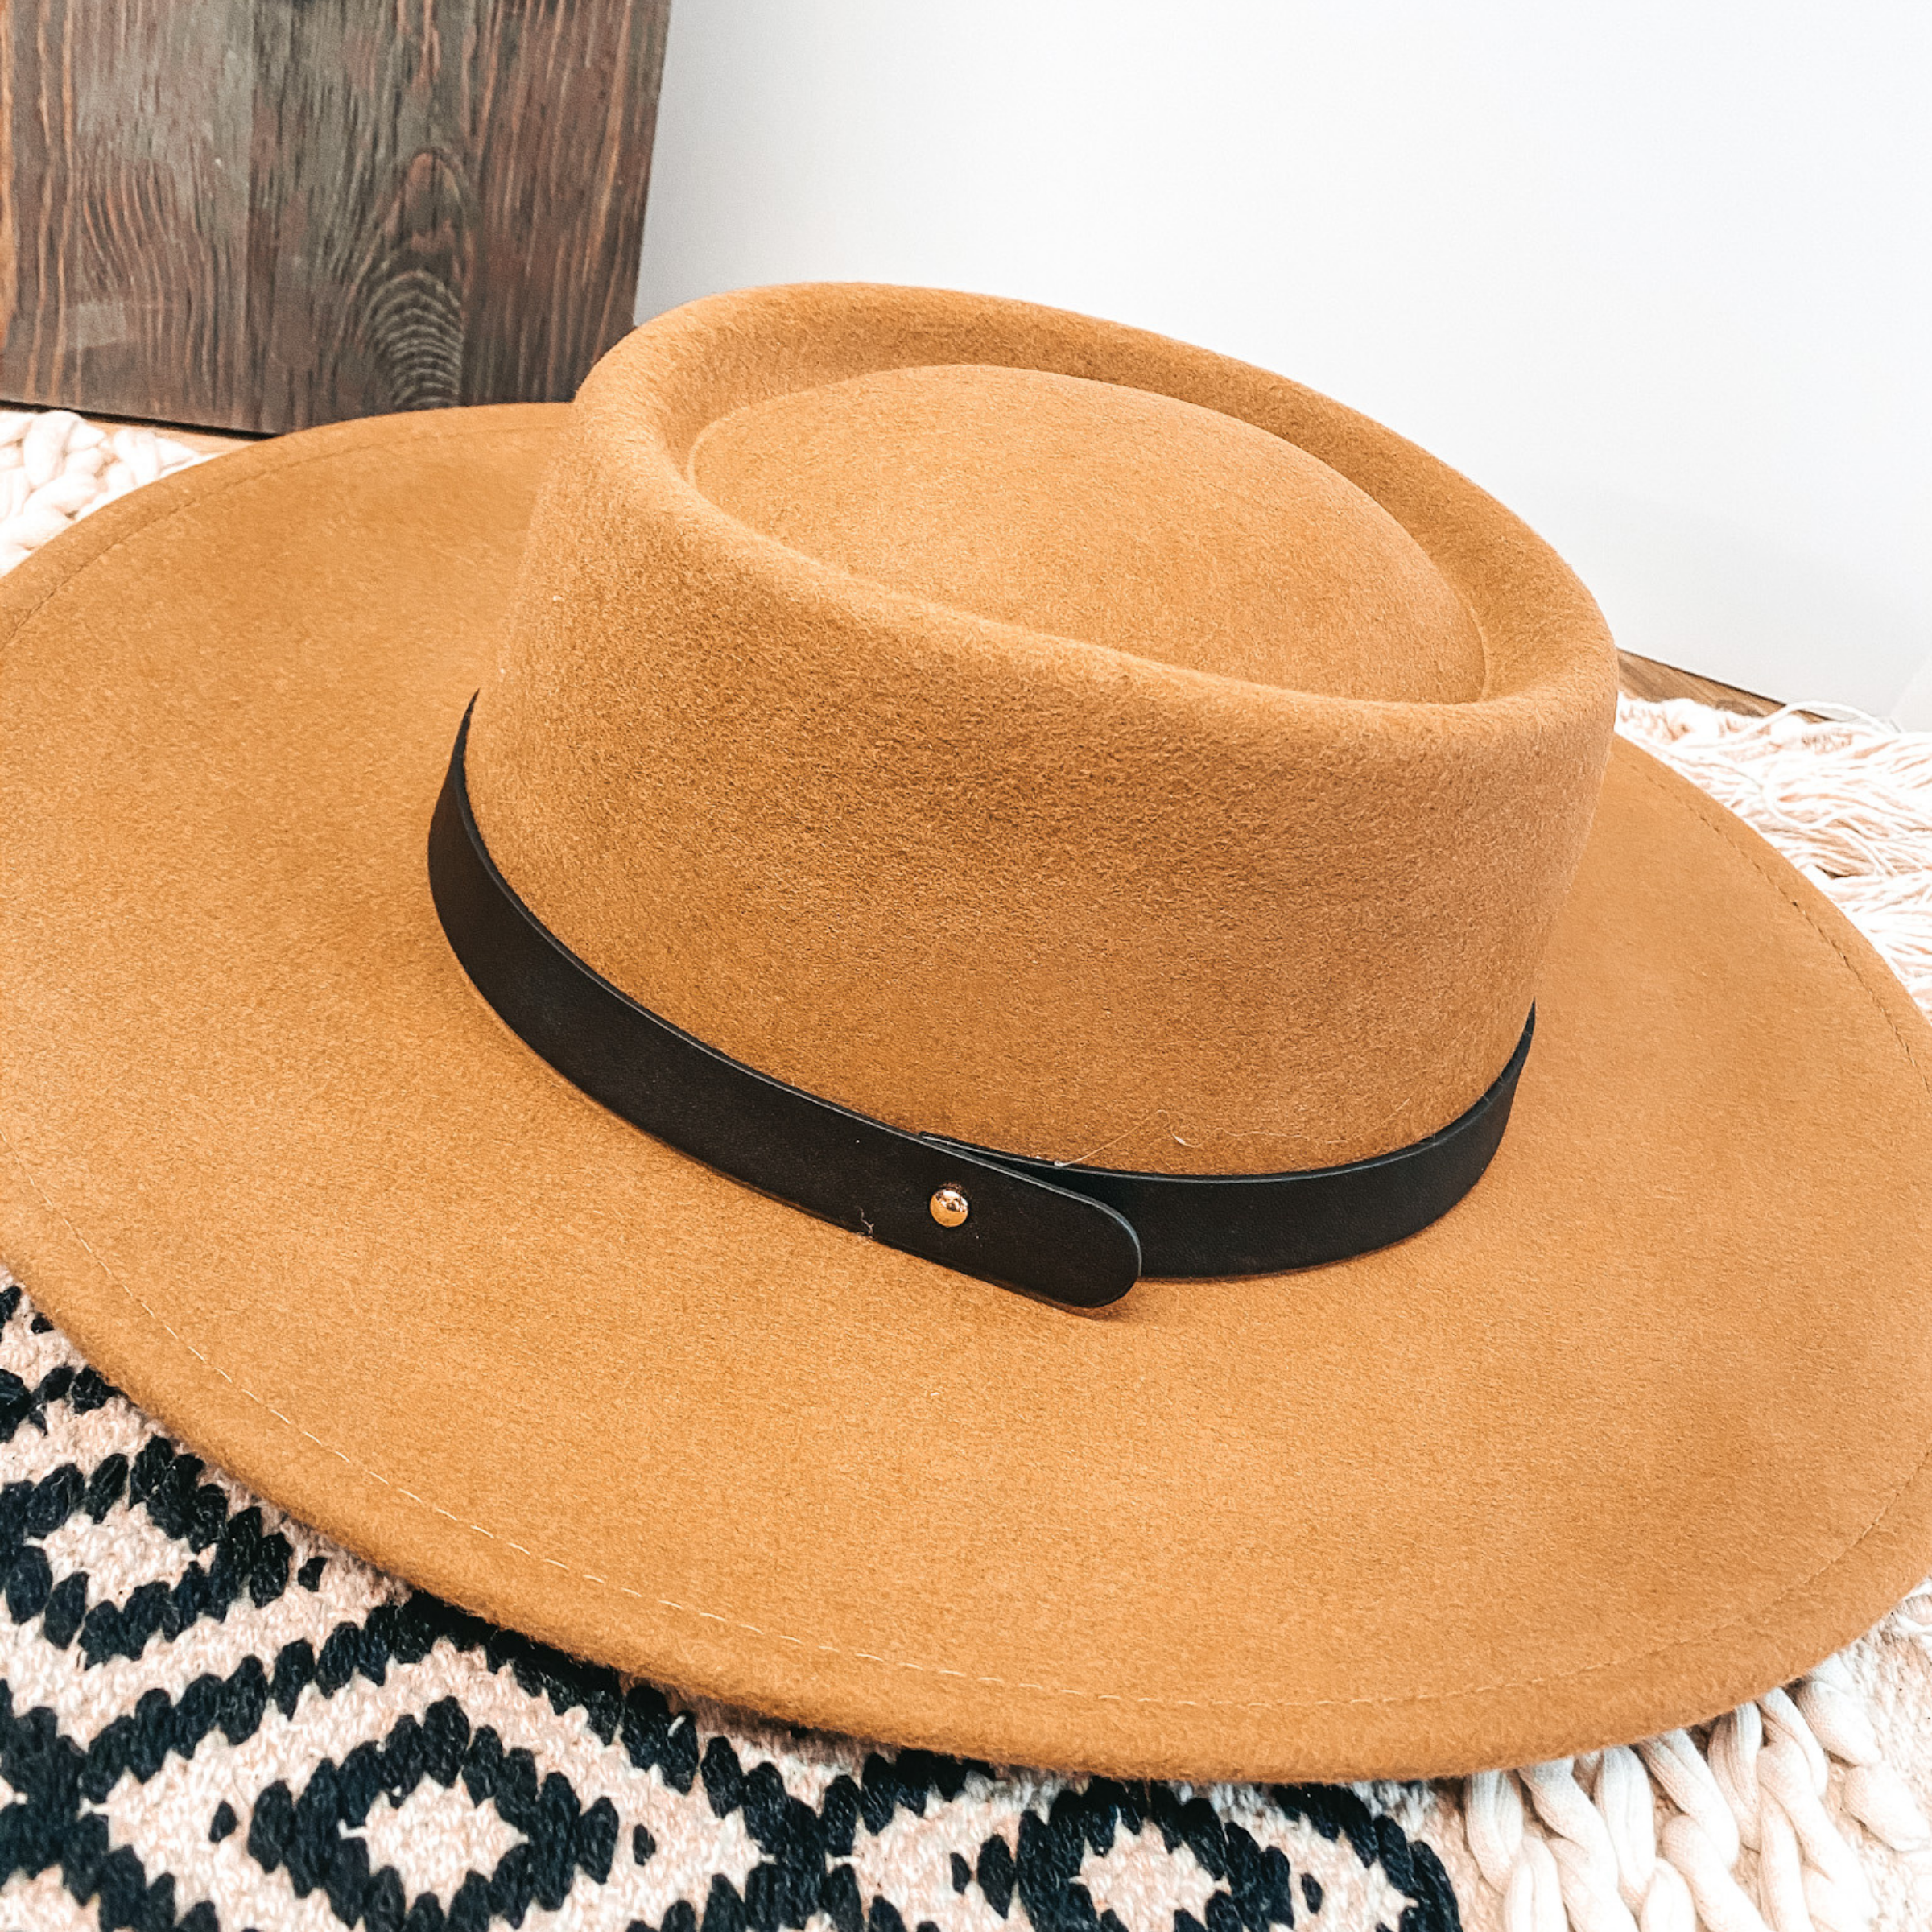 Wild Skies Black Band Oval Crown Wool Hat in Tan - Giddy Up Glamour Boutique